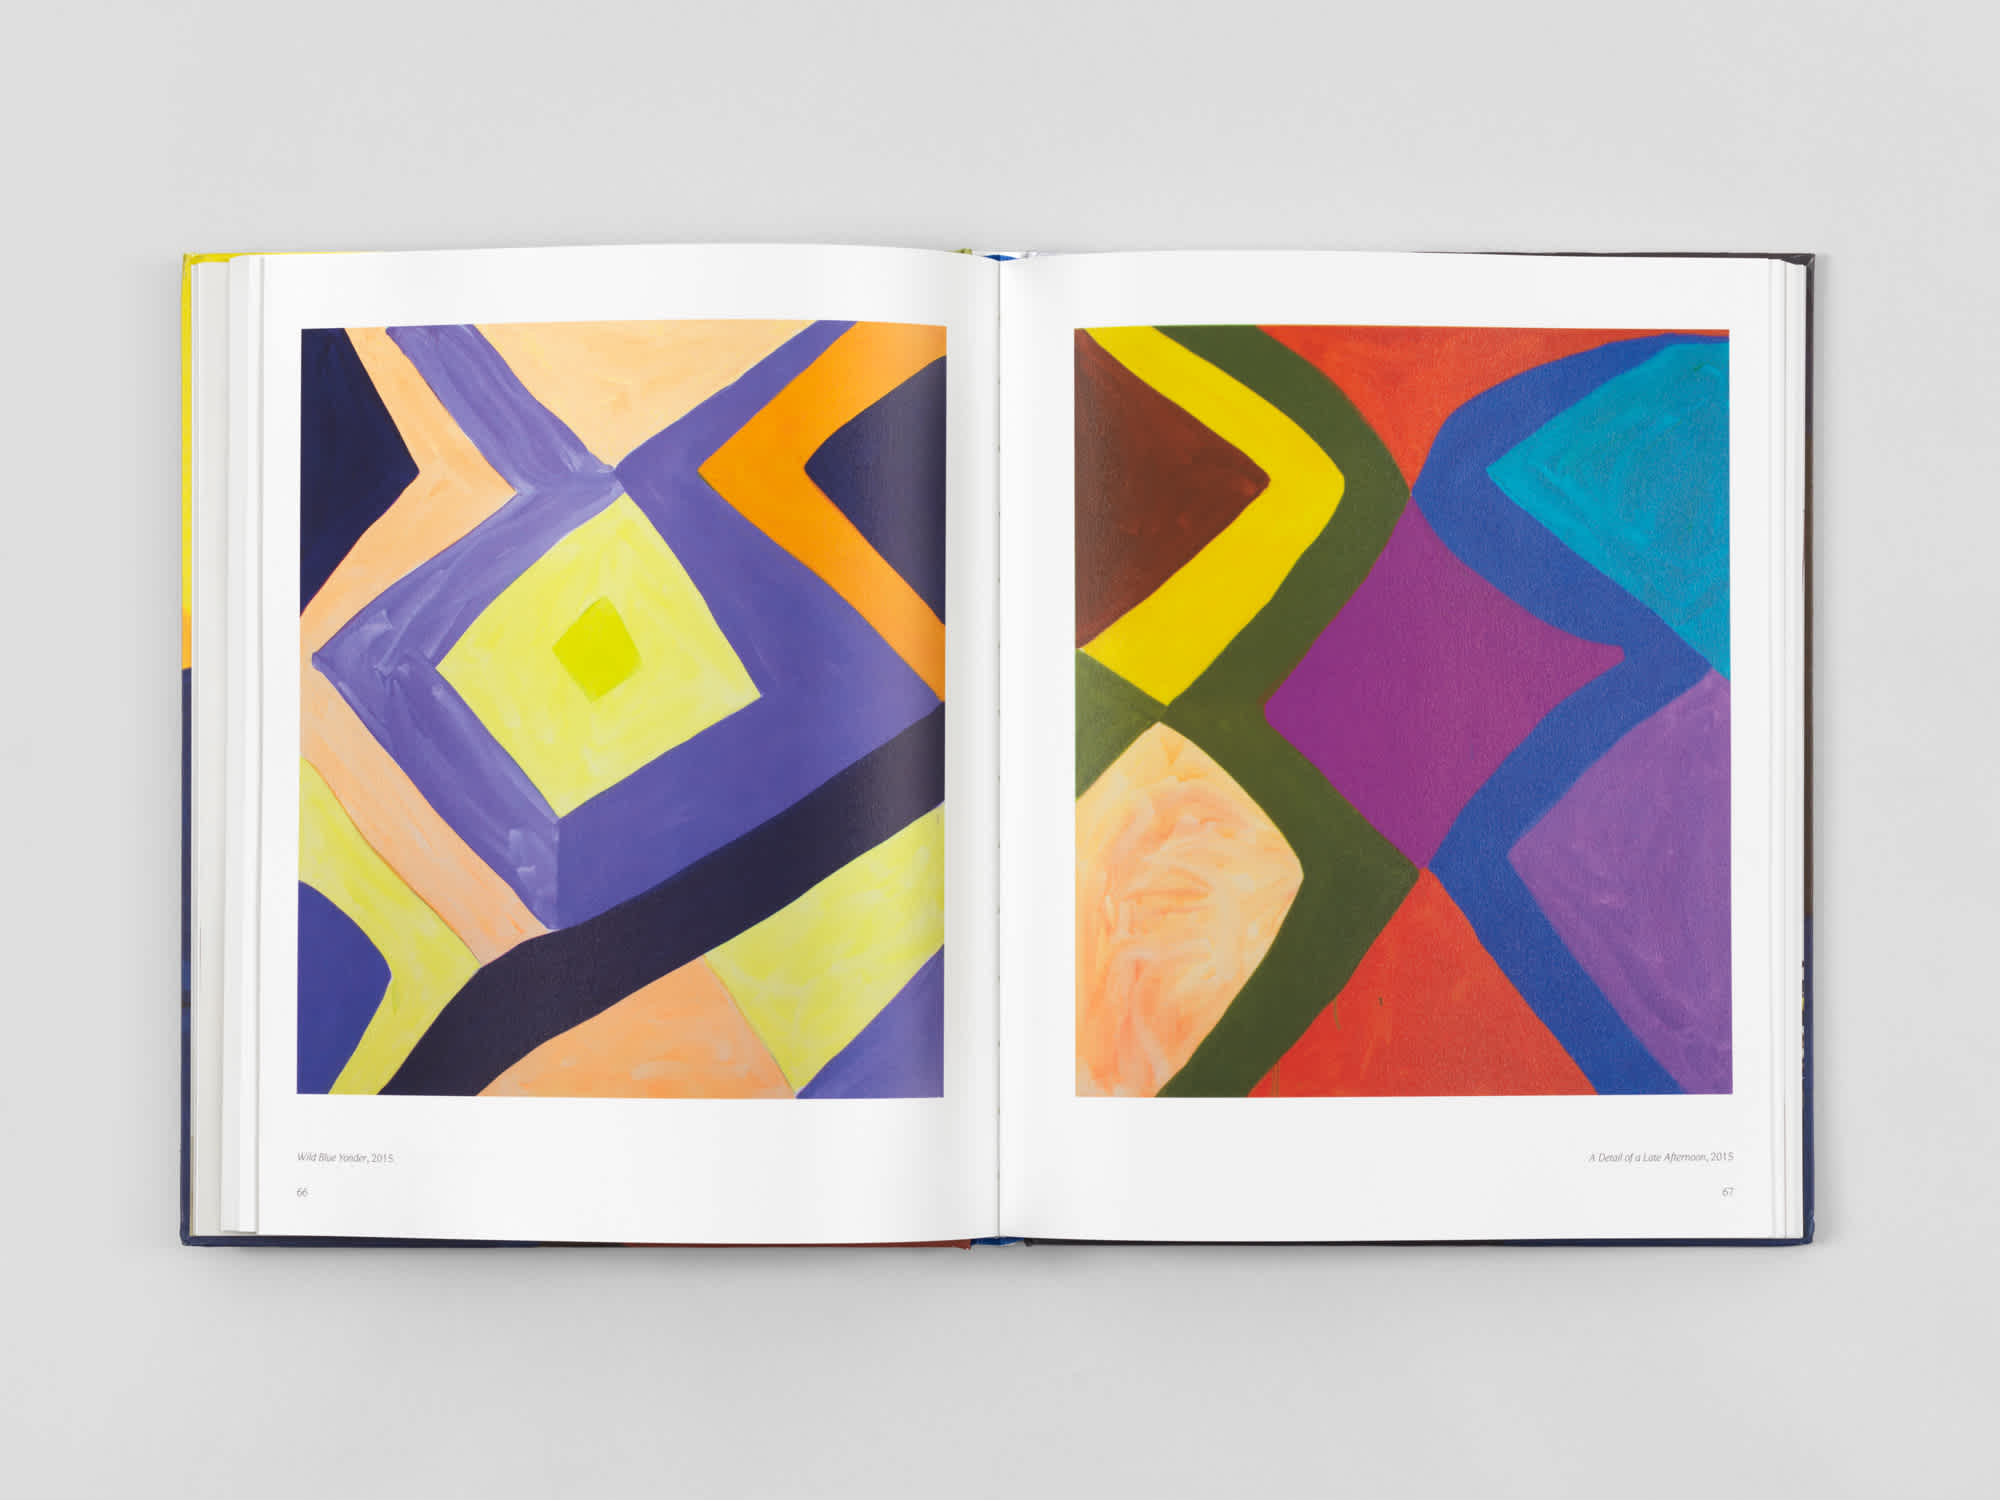 Two pages of an open book which each features a different colorful geometric painting.